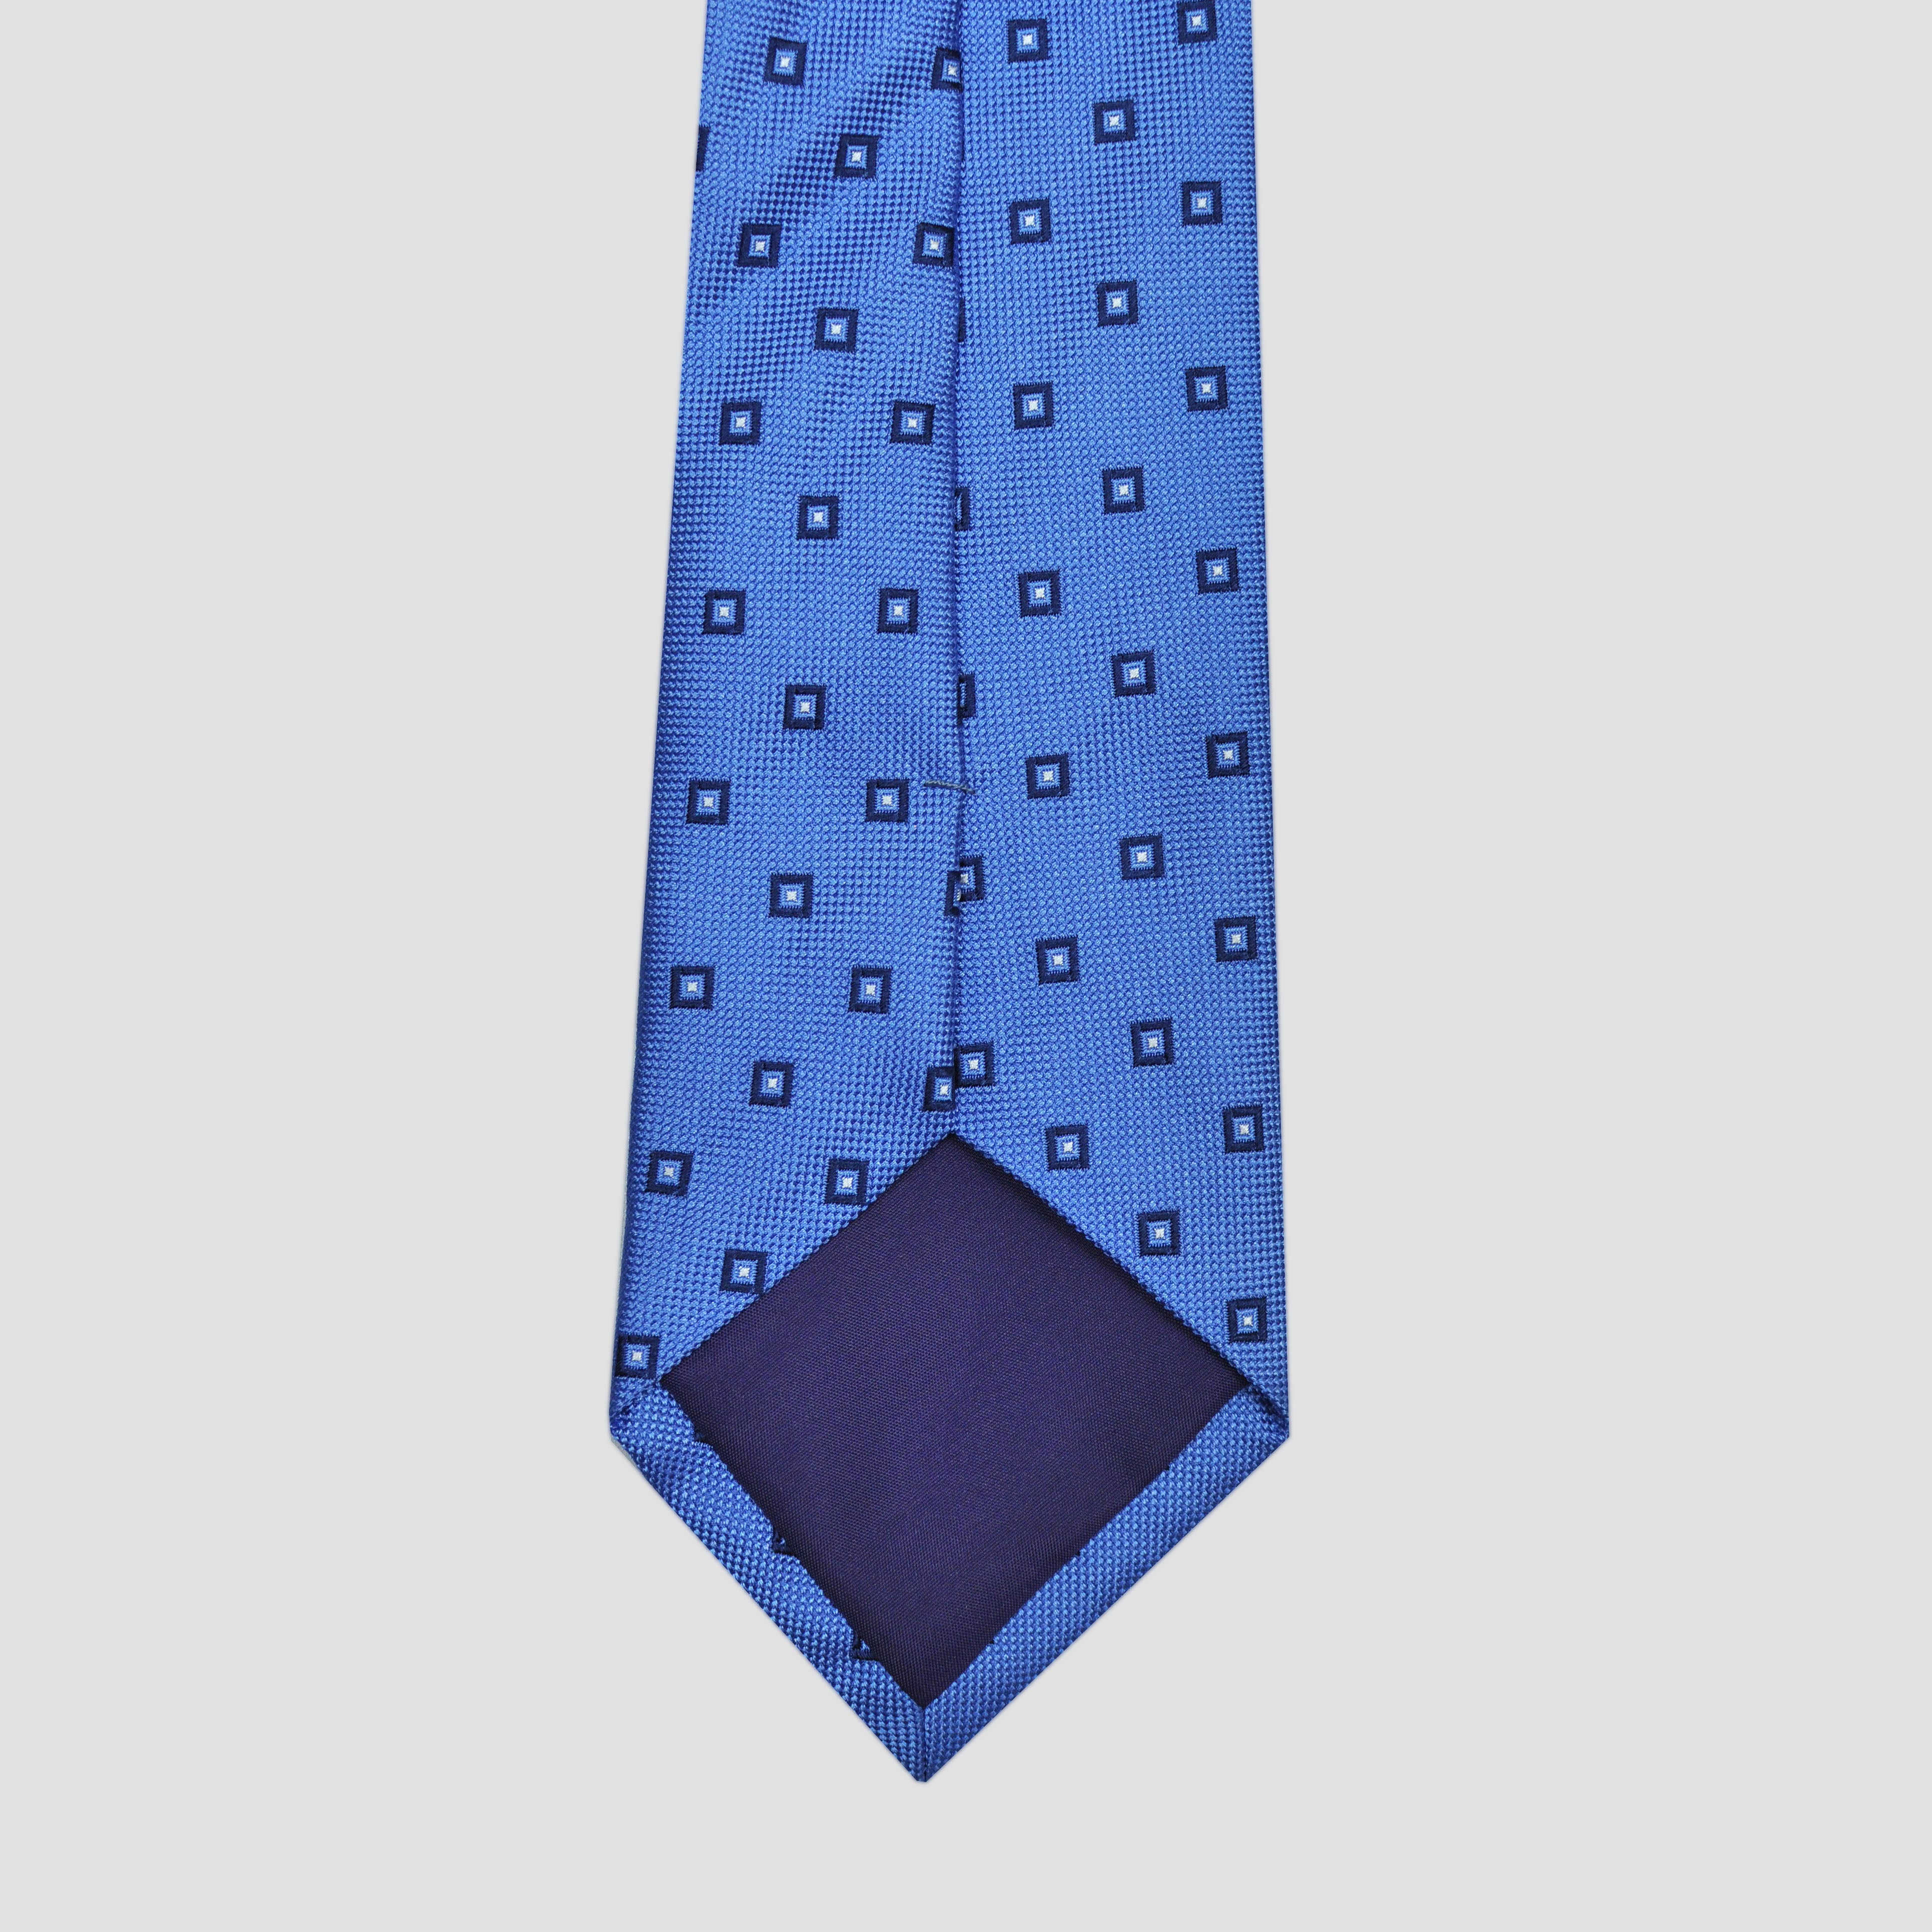 Neat Repeat Squares Woven Silk Tie in Light Blue & Navy